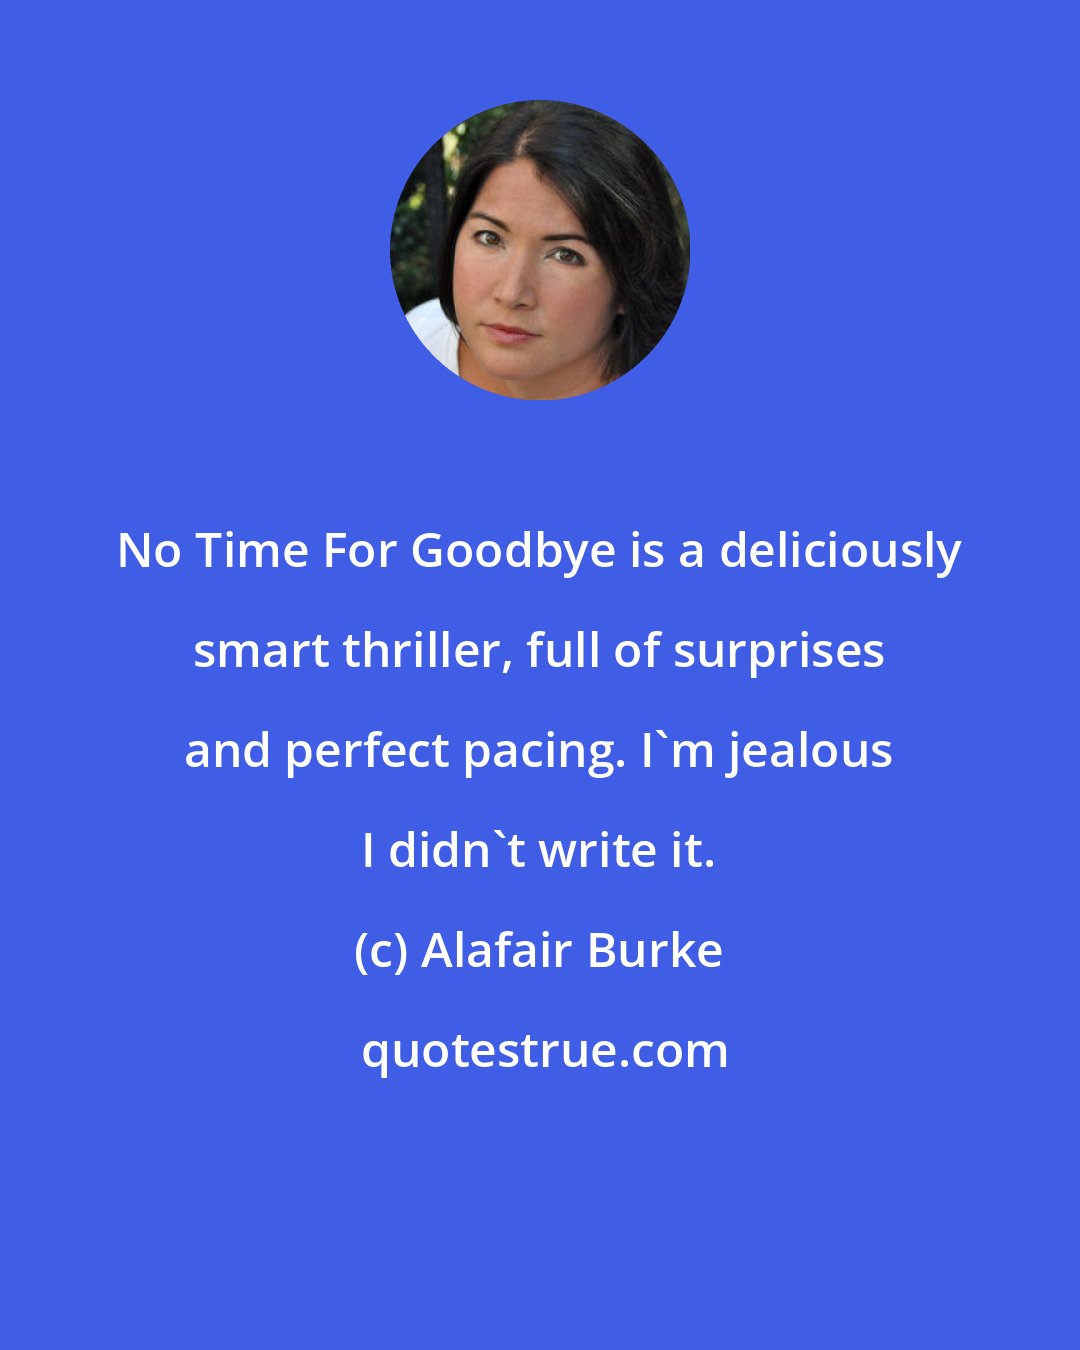 Alafair Burke: No Time For Goodbye is a deliciously smart thriller, full of surprises and perfect pacing. I'm jealous I didn't write it.